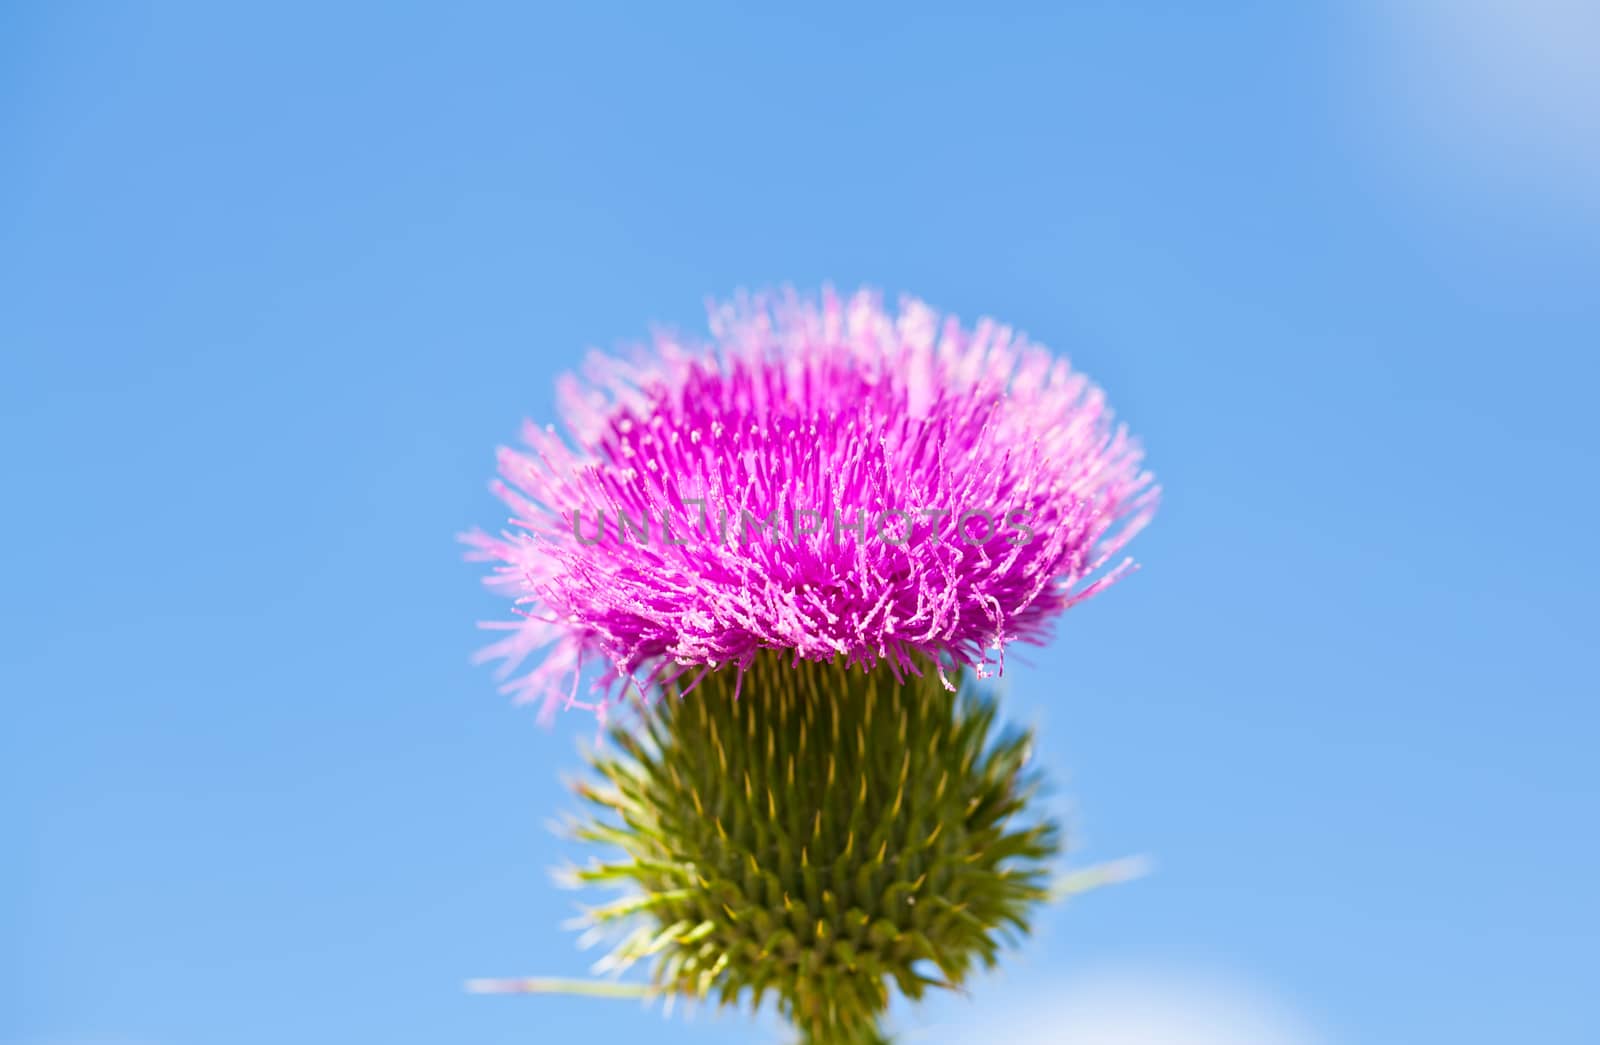 Wild thistle with pink flower on blue sky background by RawGroup